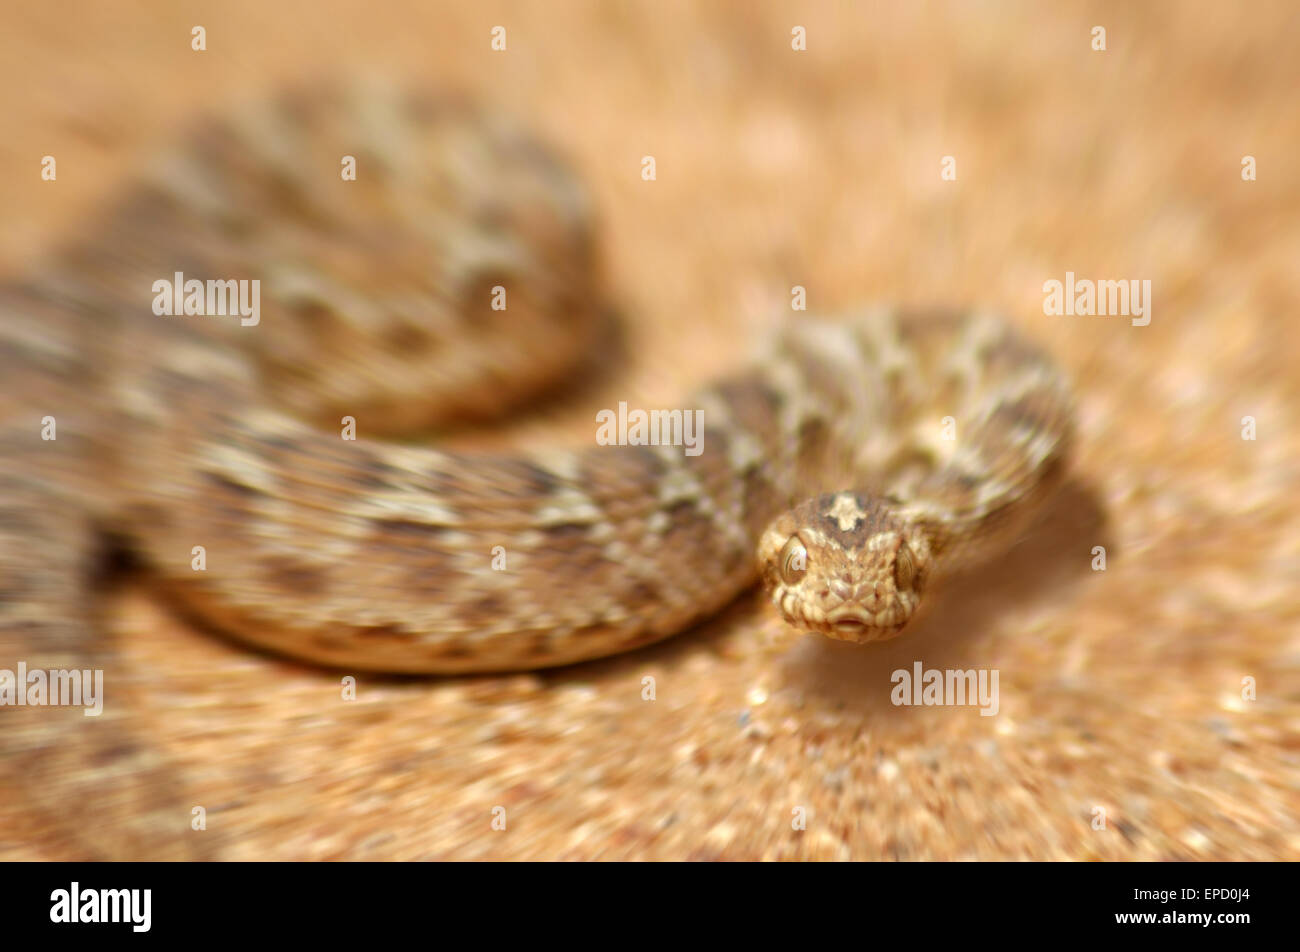 Young saw-scaled viper, Echis carinatus, Tamil Nadu, South India Stock Photo